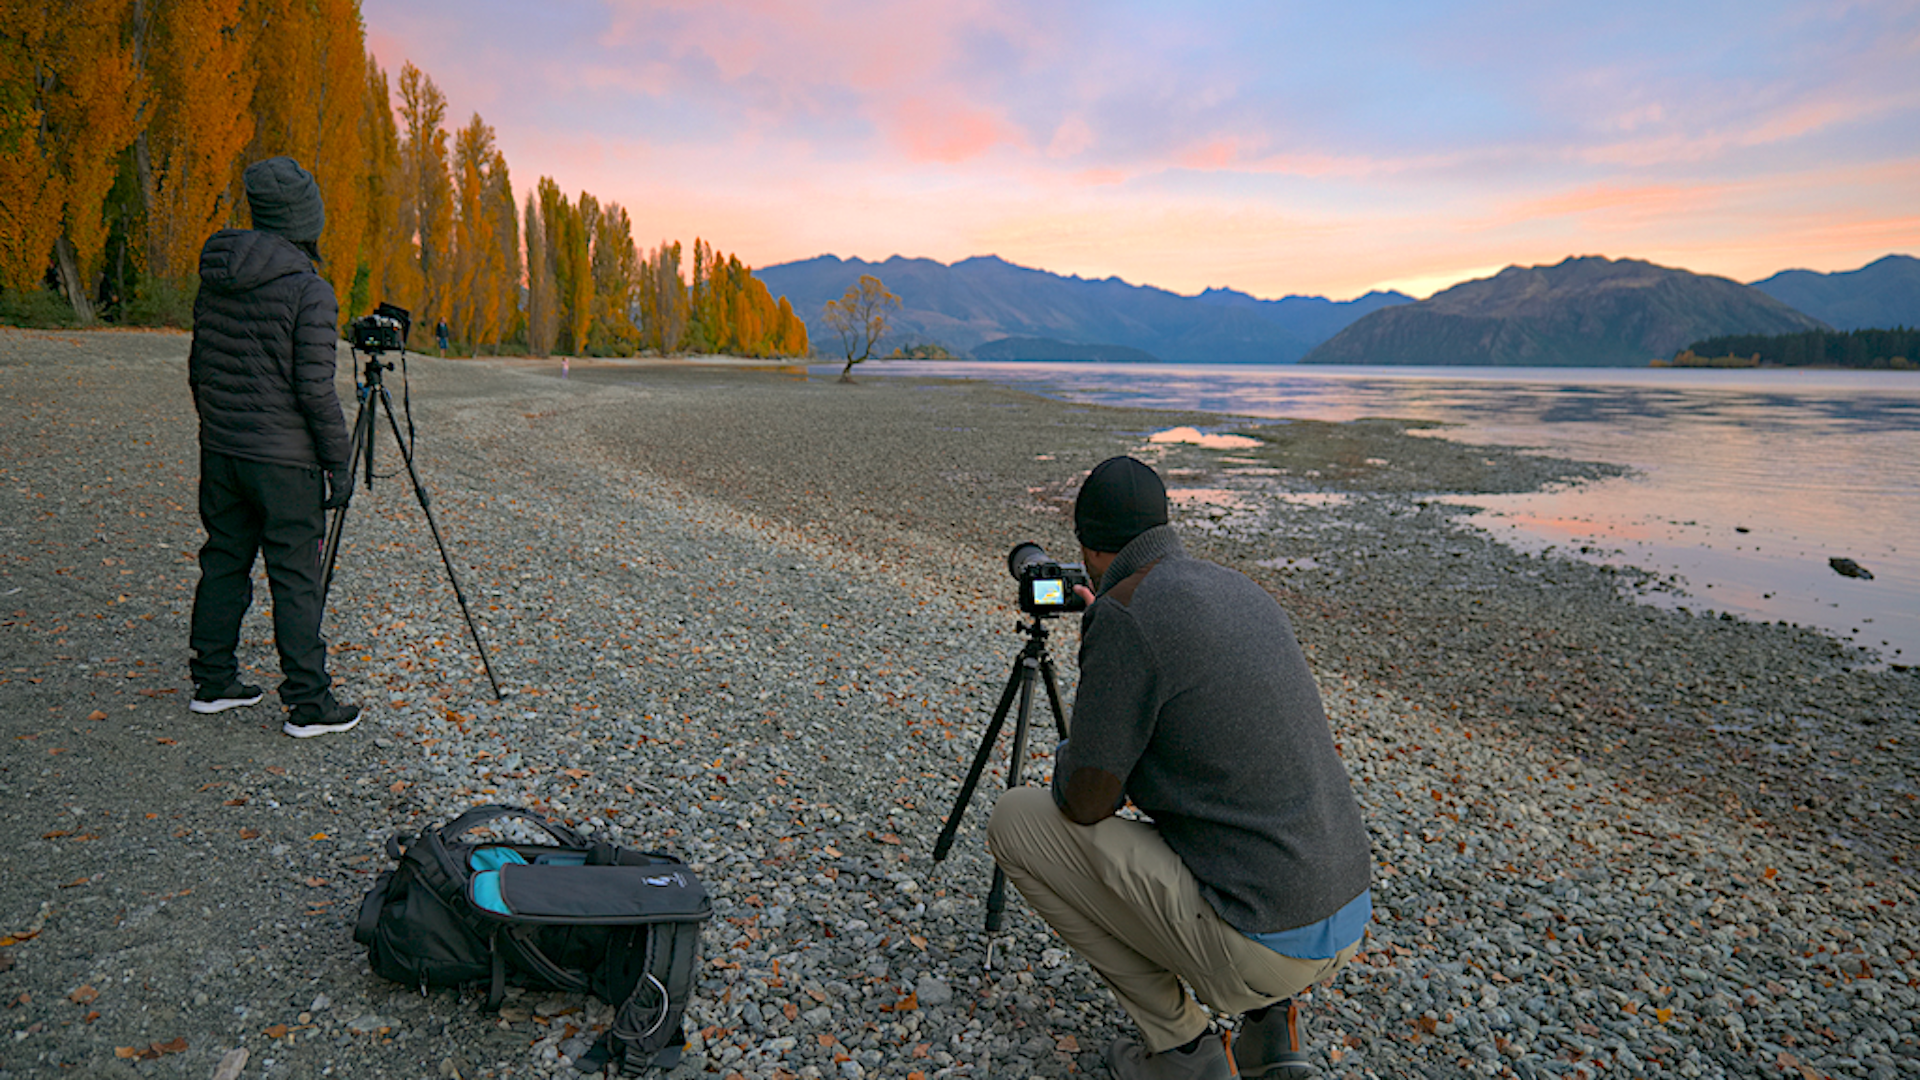 Immersive Photography with Stephen Milner amidst New Zealand's wonders, transforming your photography skills and capturing the essence of the country.